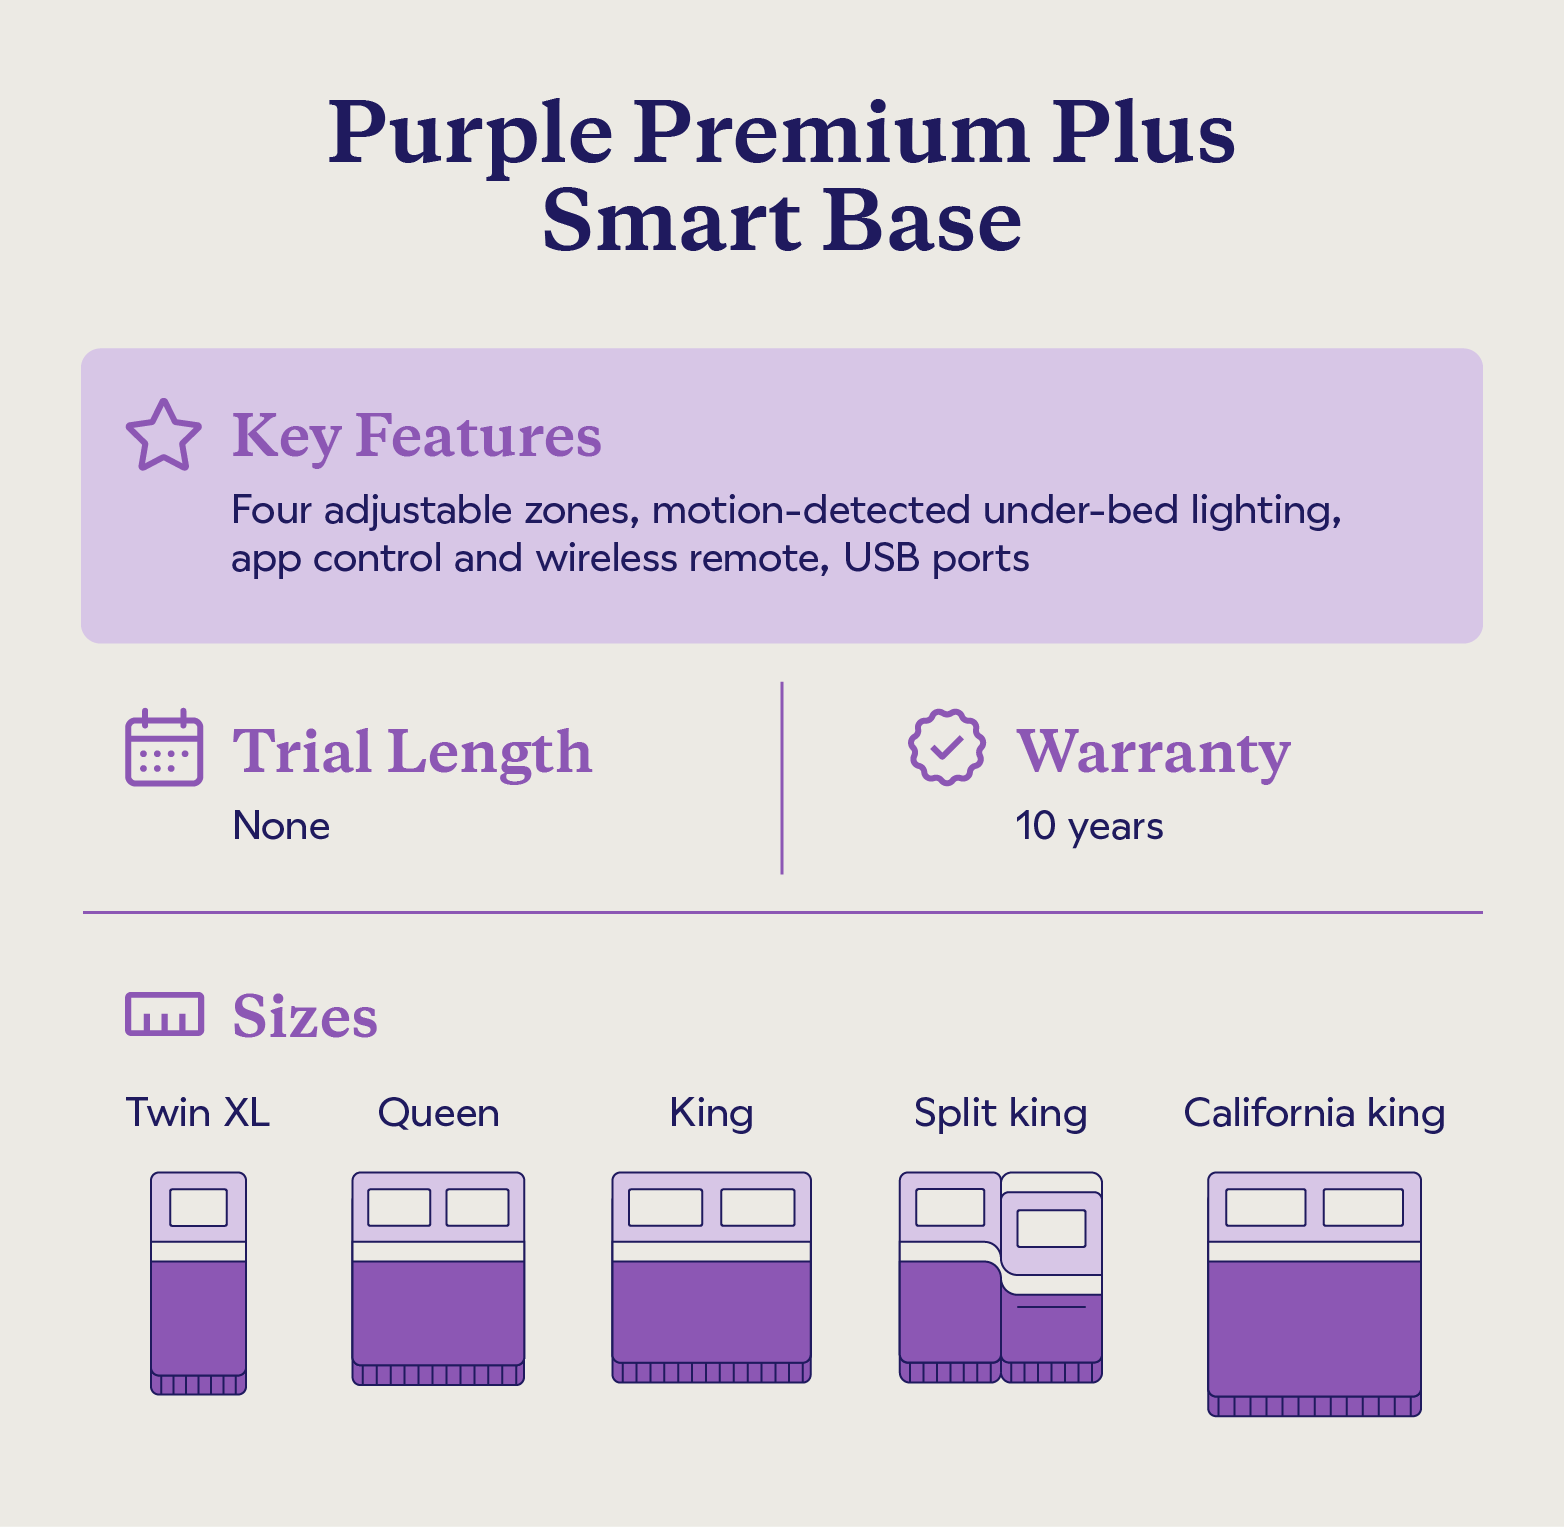 Key features and sizes of the Purple Premium Plus Smart Base.